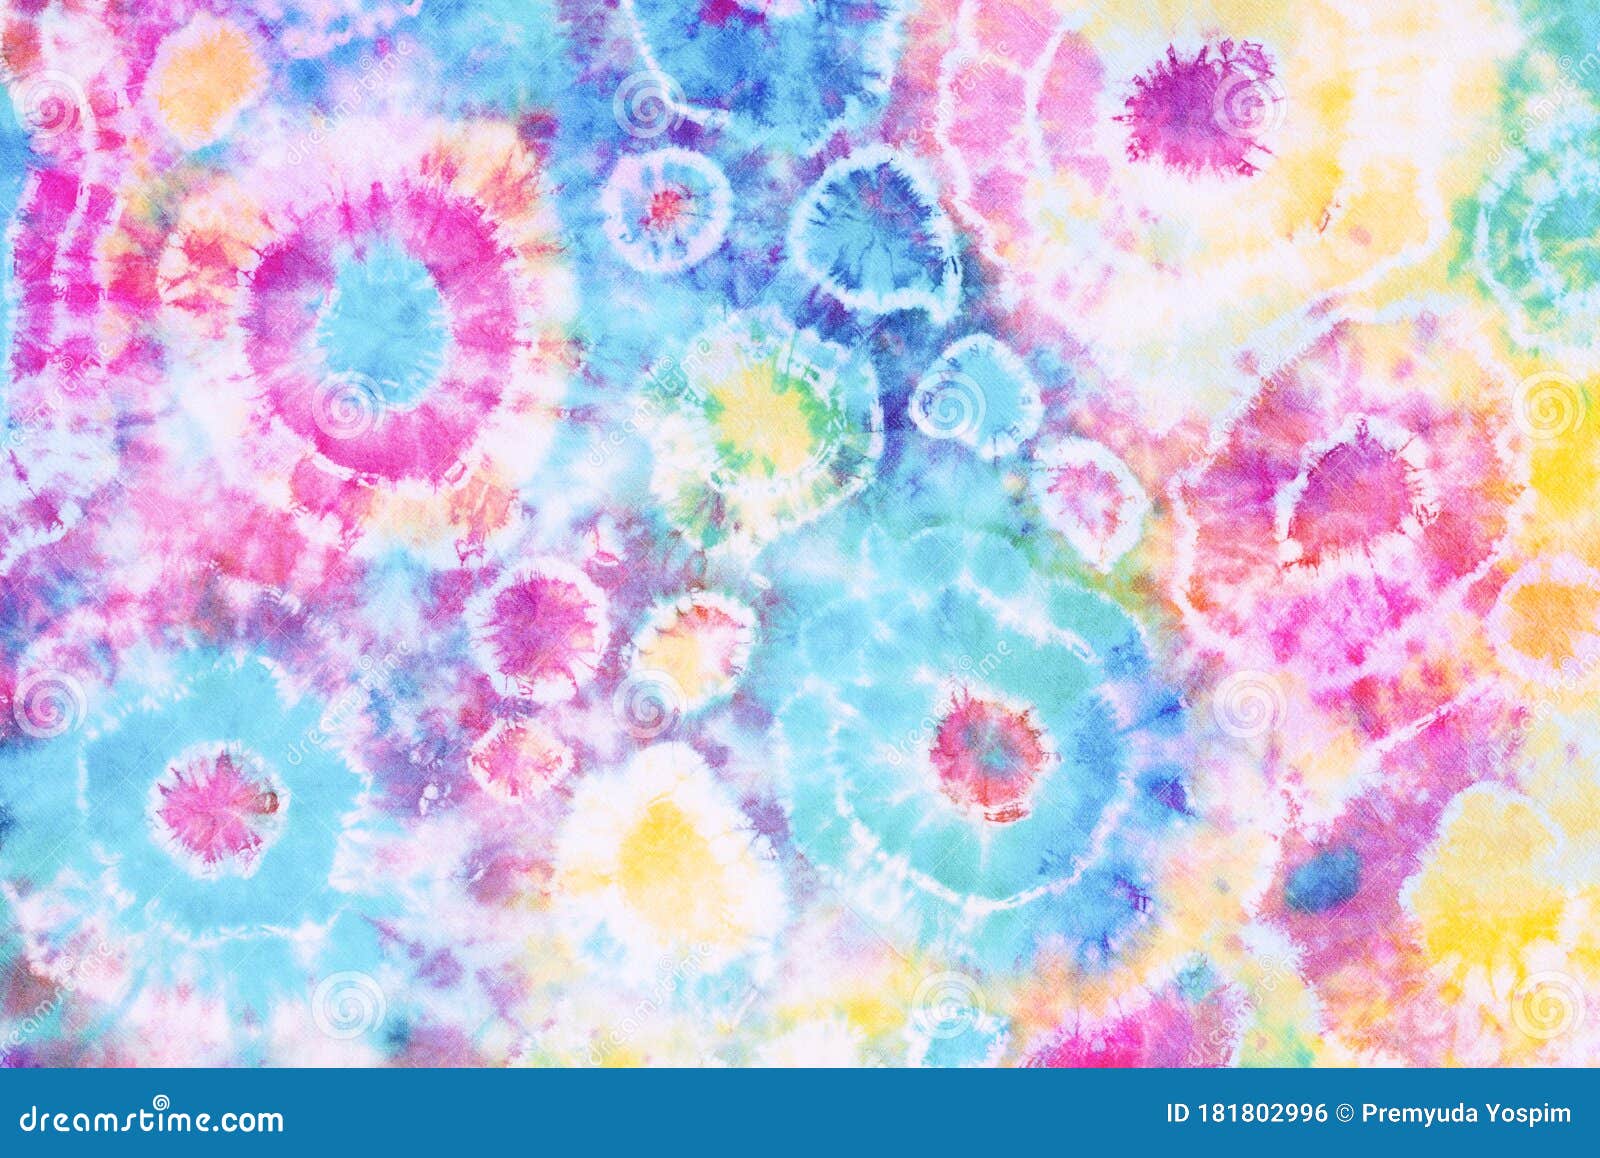 colorful tie dye pattern abstract texture background